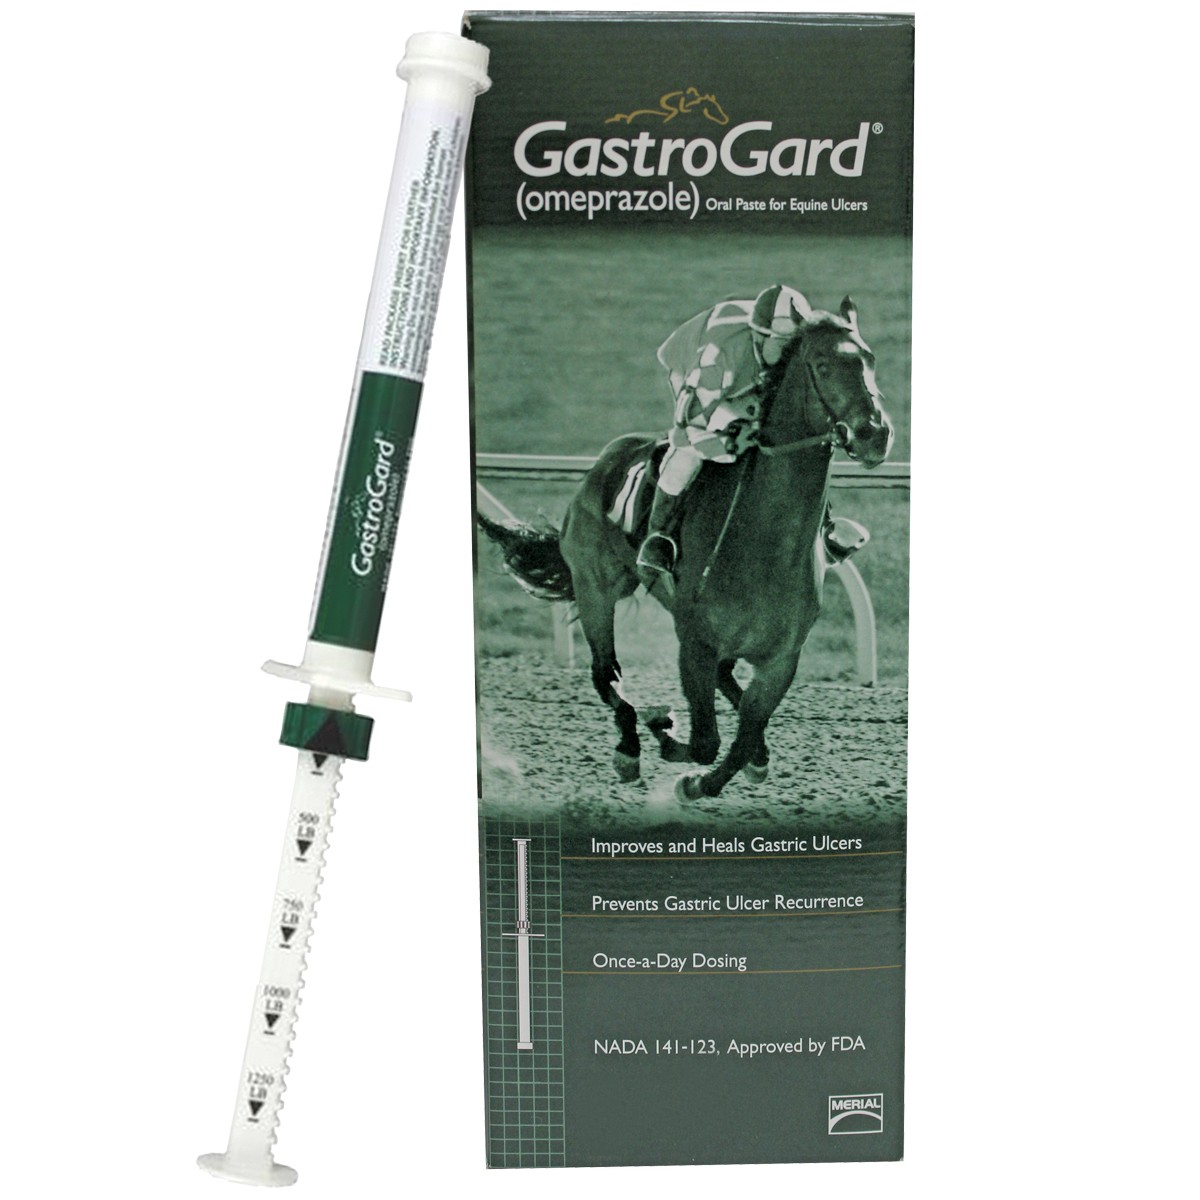 Each of the horses in the study was treated daily with a full tube of GastroGard.